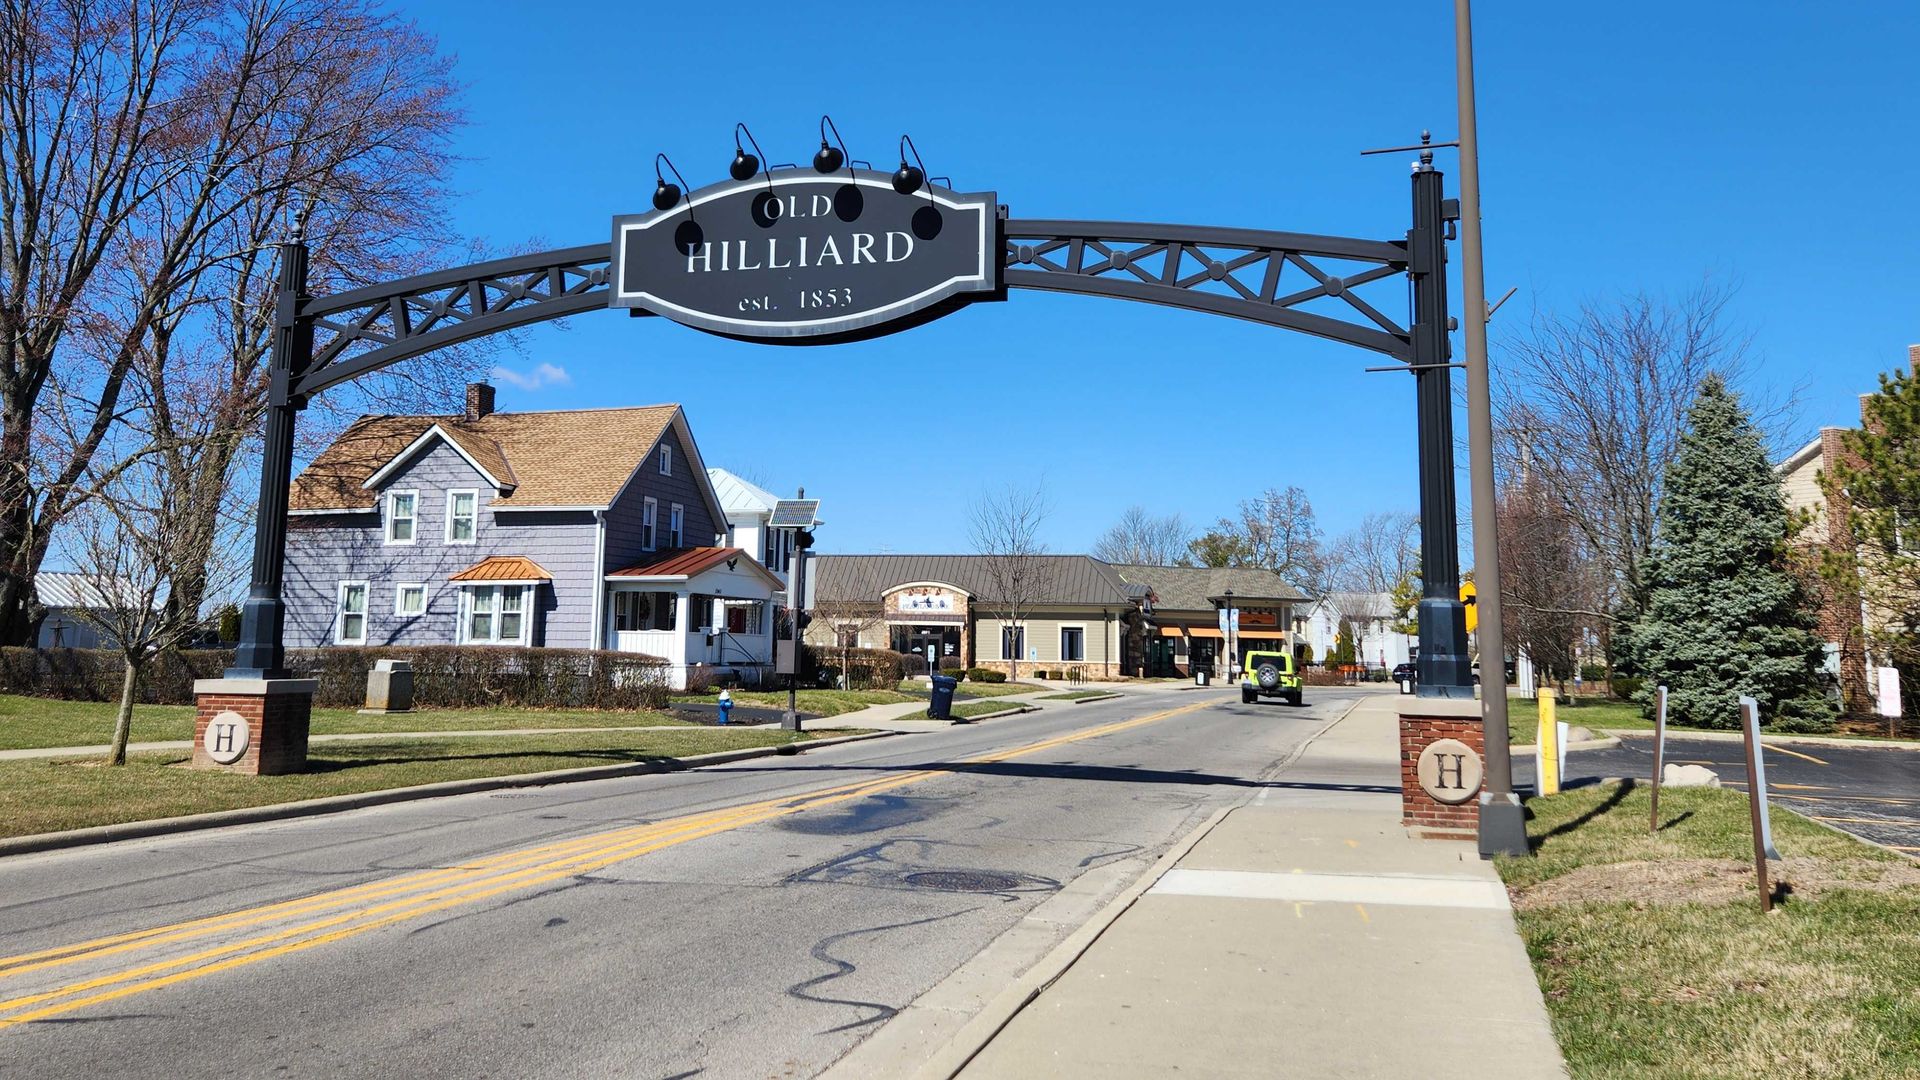 The entry sign into the Old Hilliard neighborhood. 